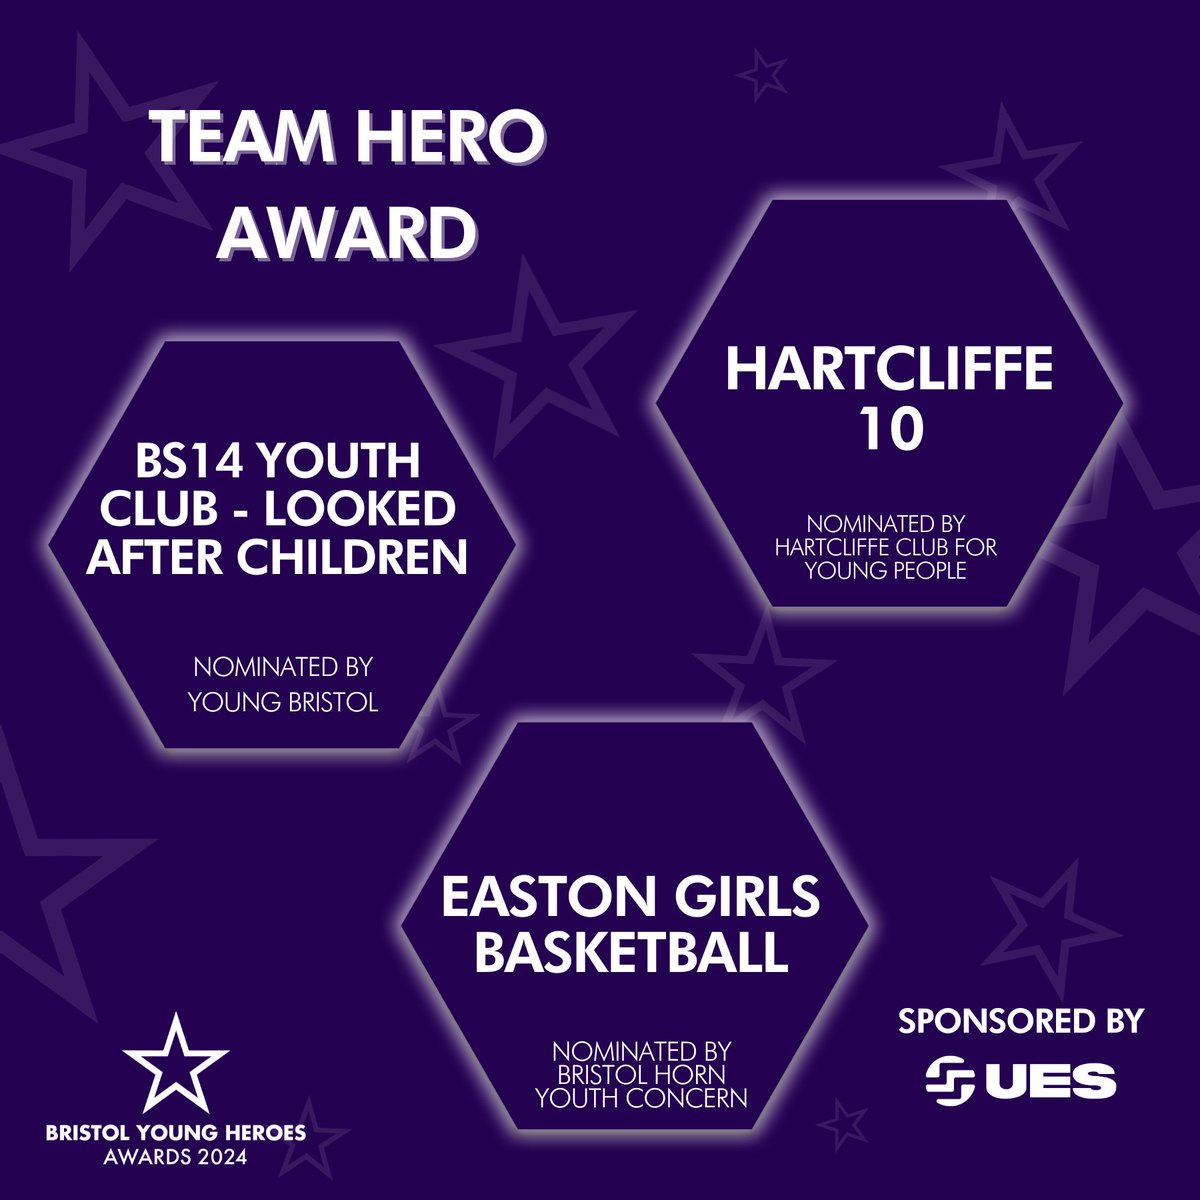 ✨Team Hero Award✨ Congratulations to the finalists for the Team Hero Award for the Bristol Young Hero Awards! 🌟 BS14 Youth Club - Looked After Children 🌟 Hartcliffe 10 🌟Easton Girls Basketball Good luck 🤞 Thank you to @UESLTD for sponsoring the Team Hero Award 🙏